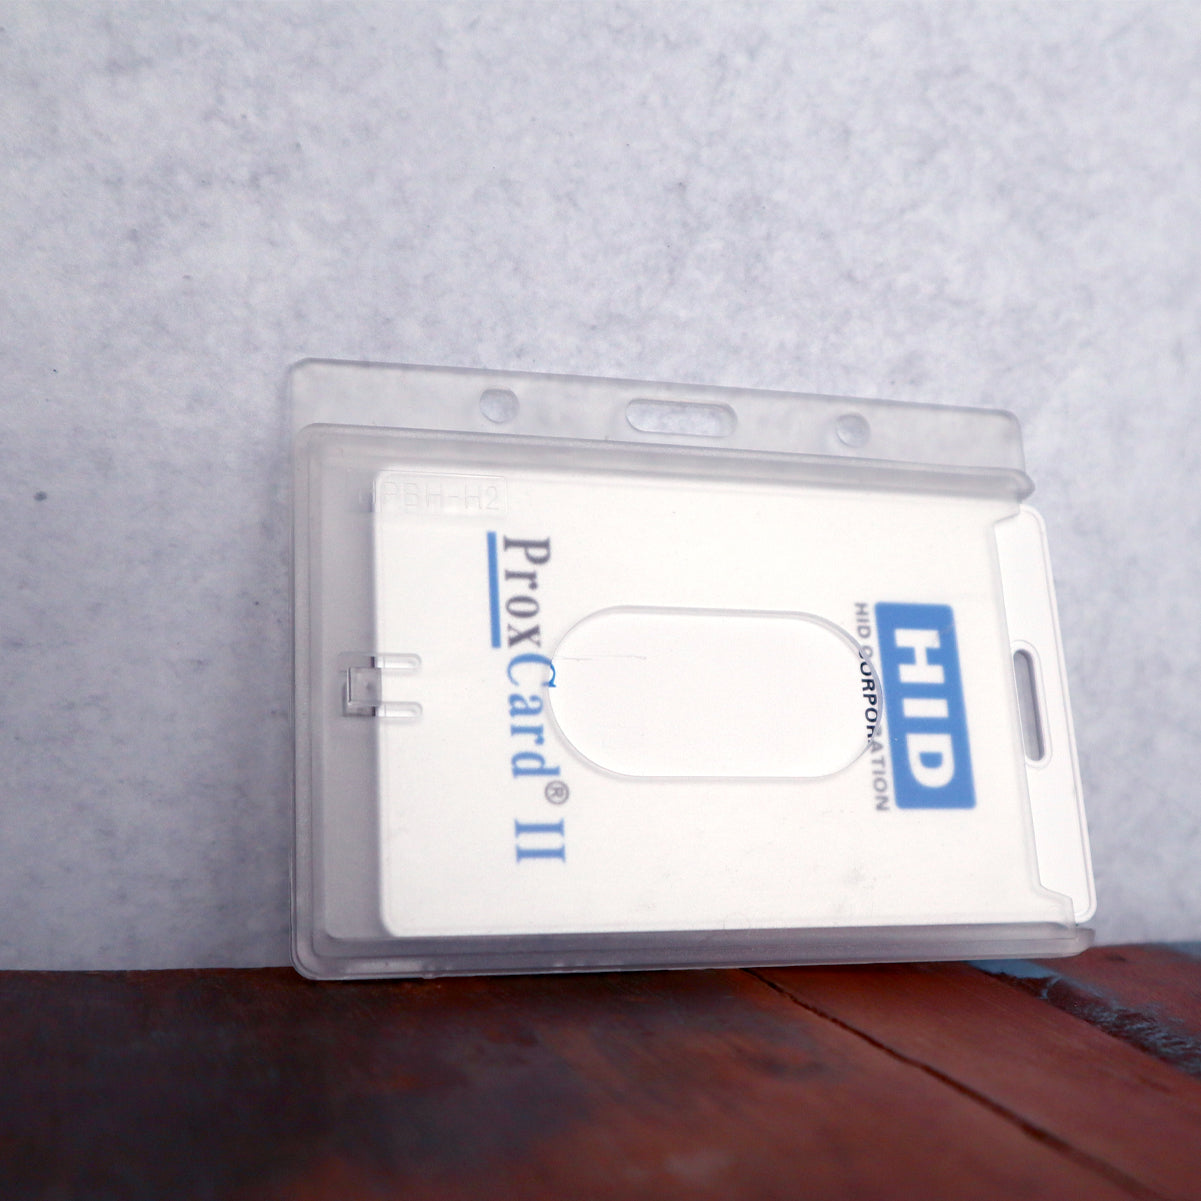 Horizontal 70 - 90 Mil ProxCard II / Thick HID Proximity Card Holder (SPID-PROX-H)